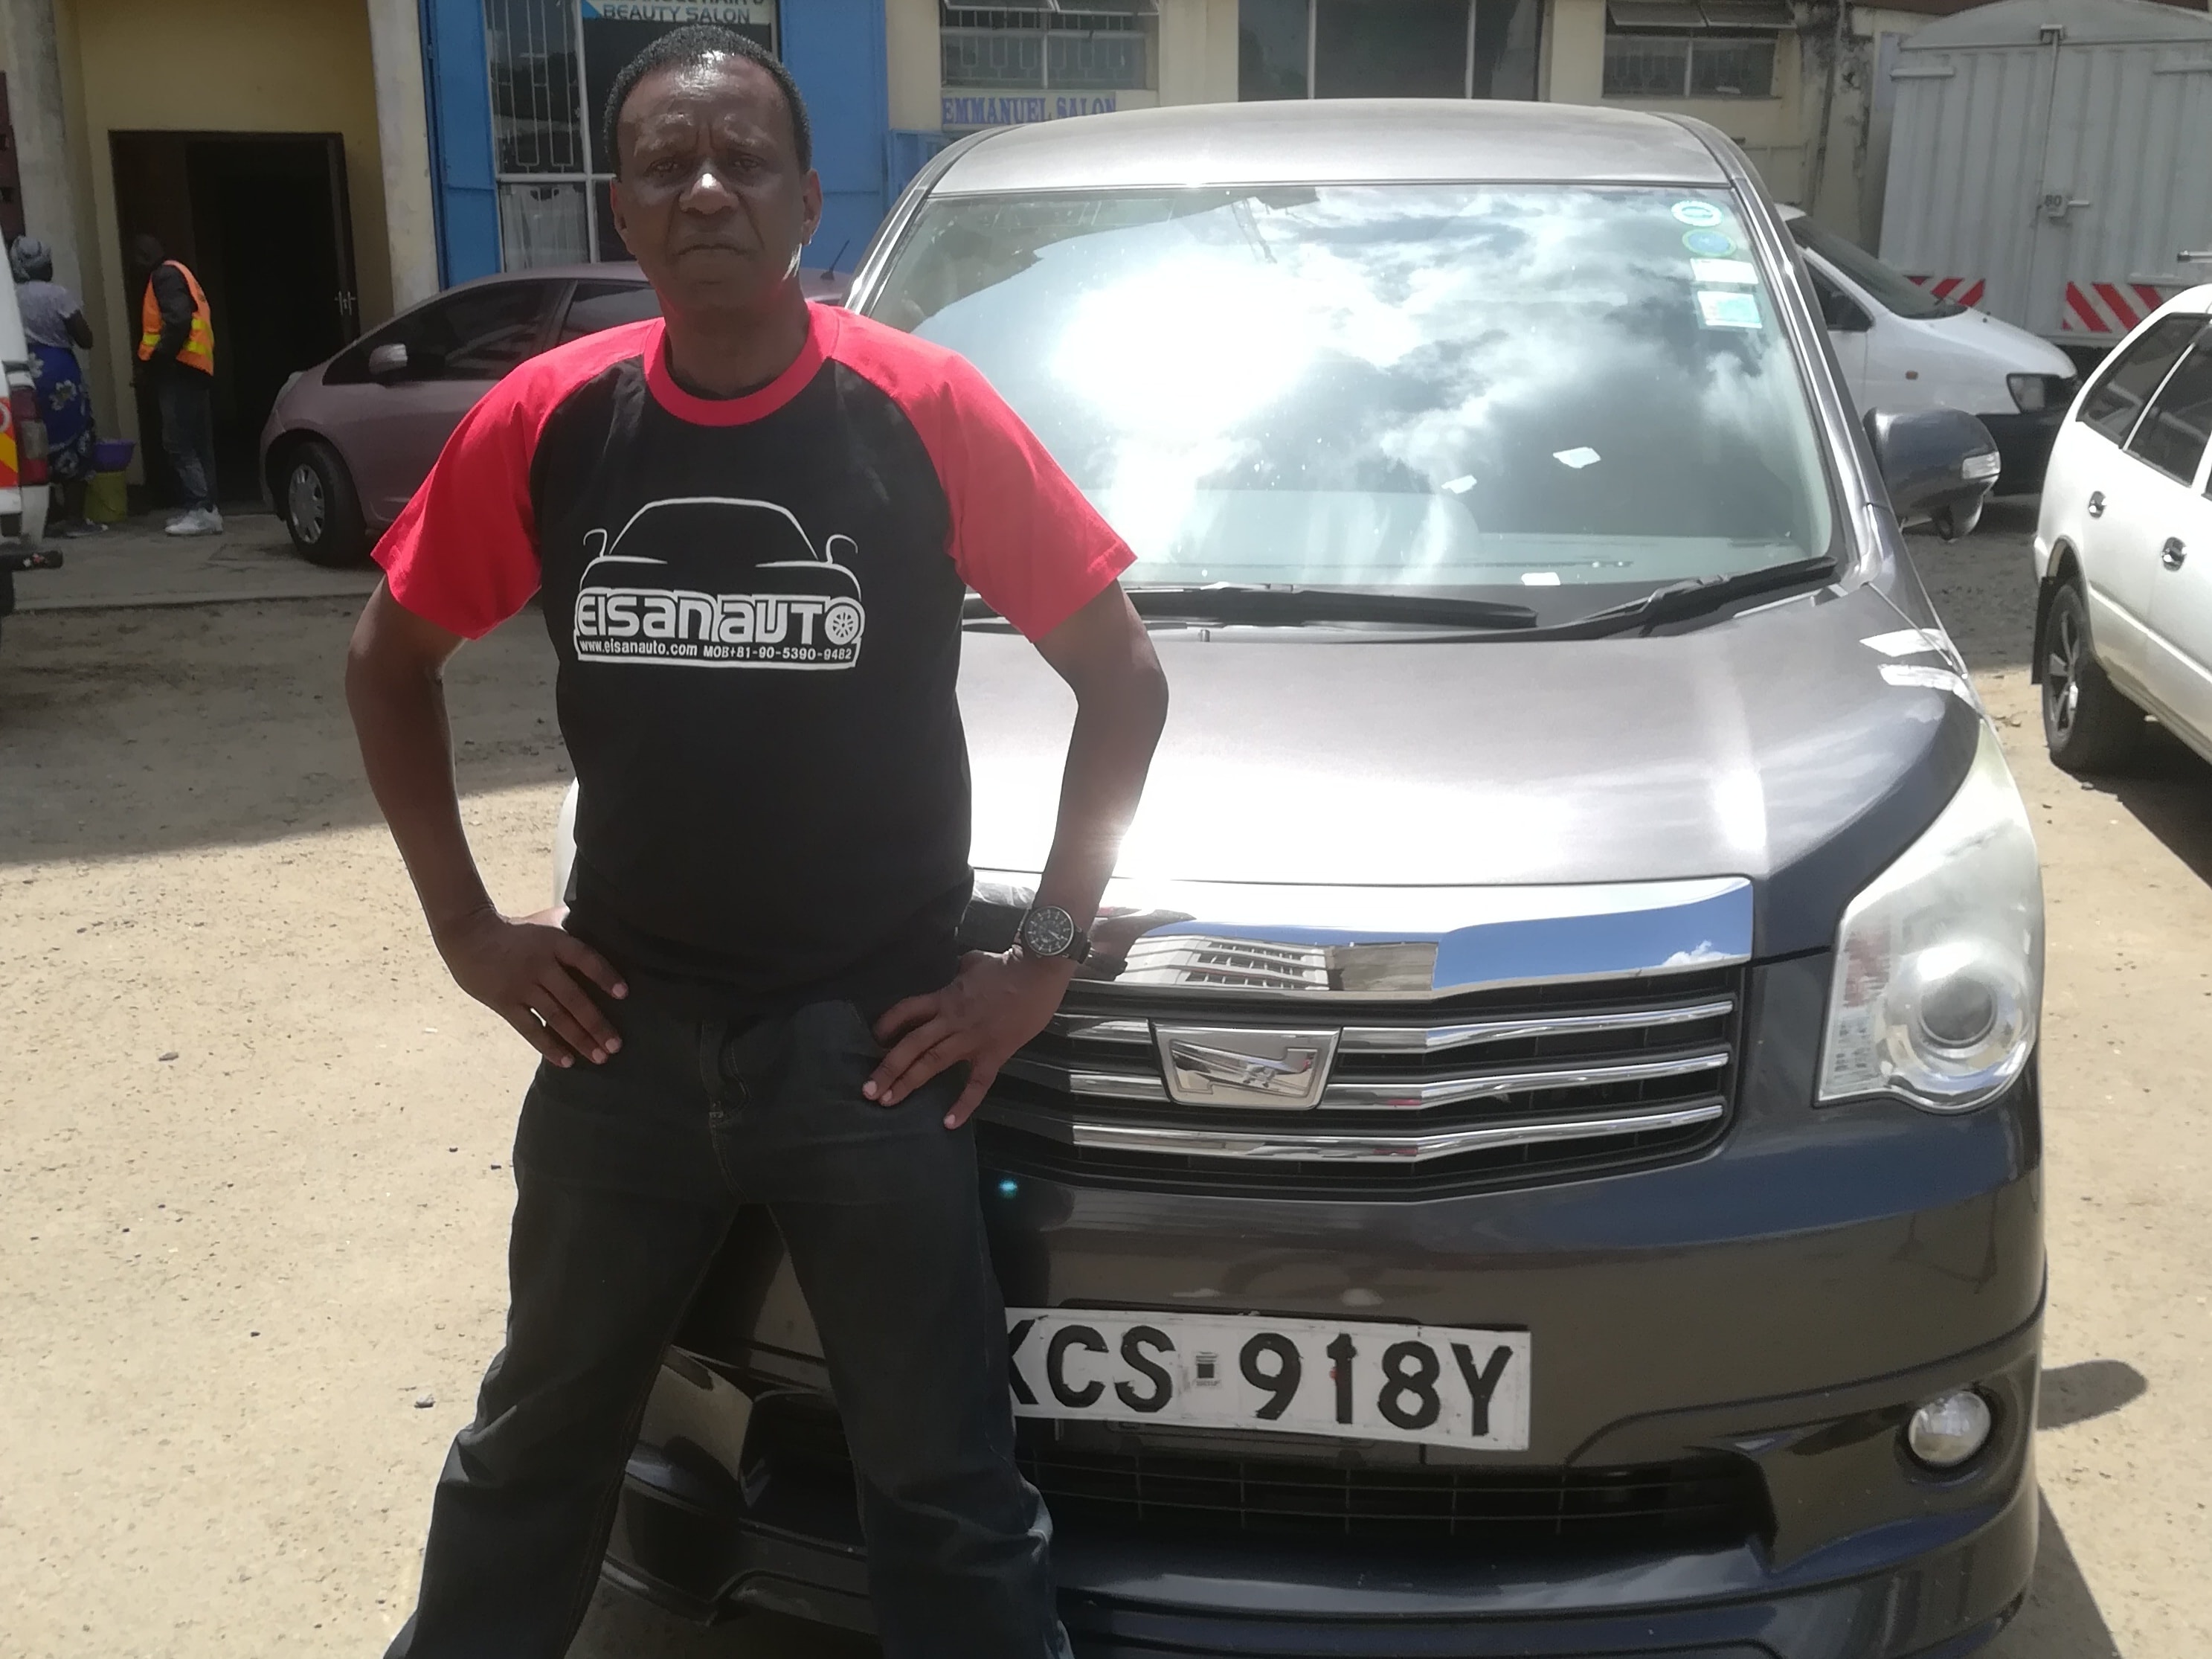 Customer who purchased a car from EISAN CO.,LTD.